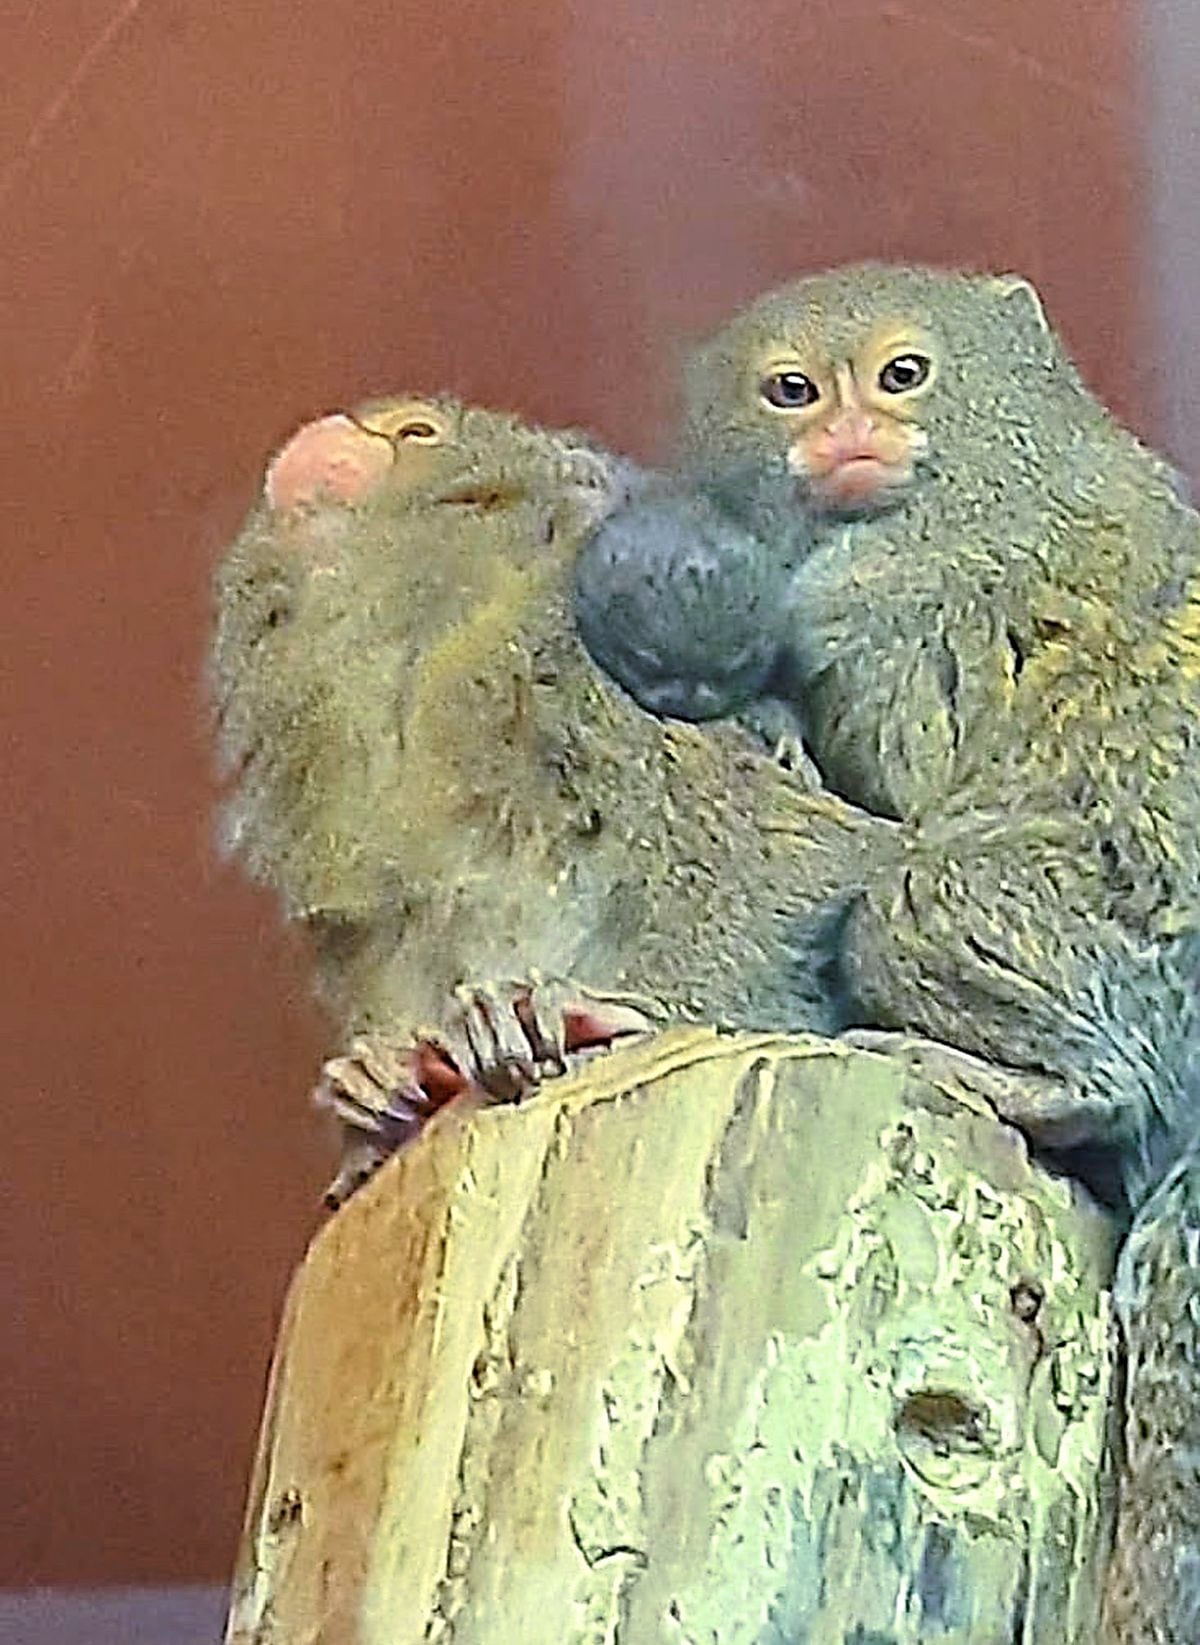 A pygmy marmoset baby inbetween a proud mum and dad at Dudley Zoo